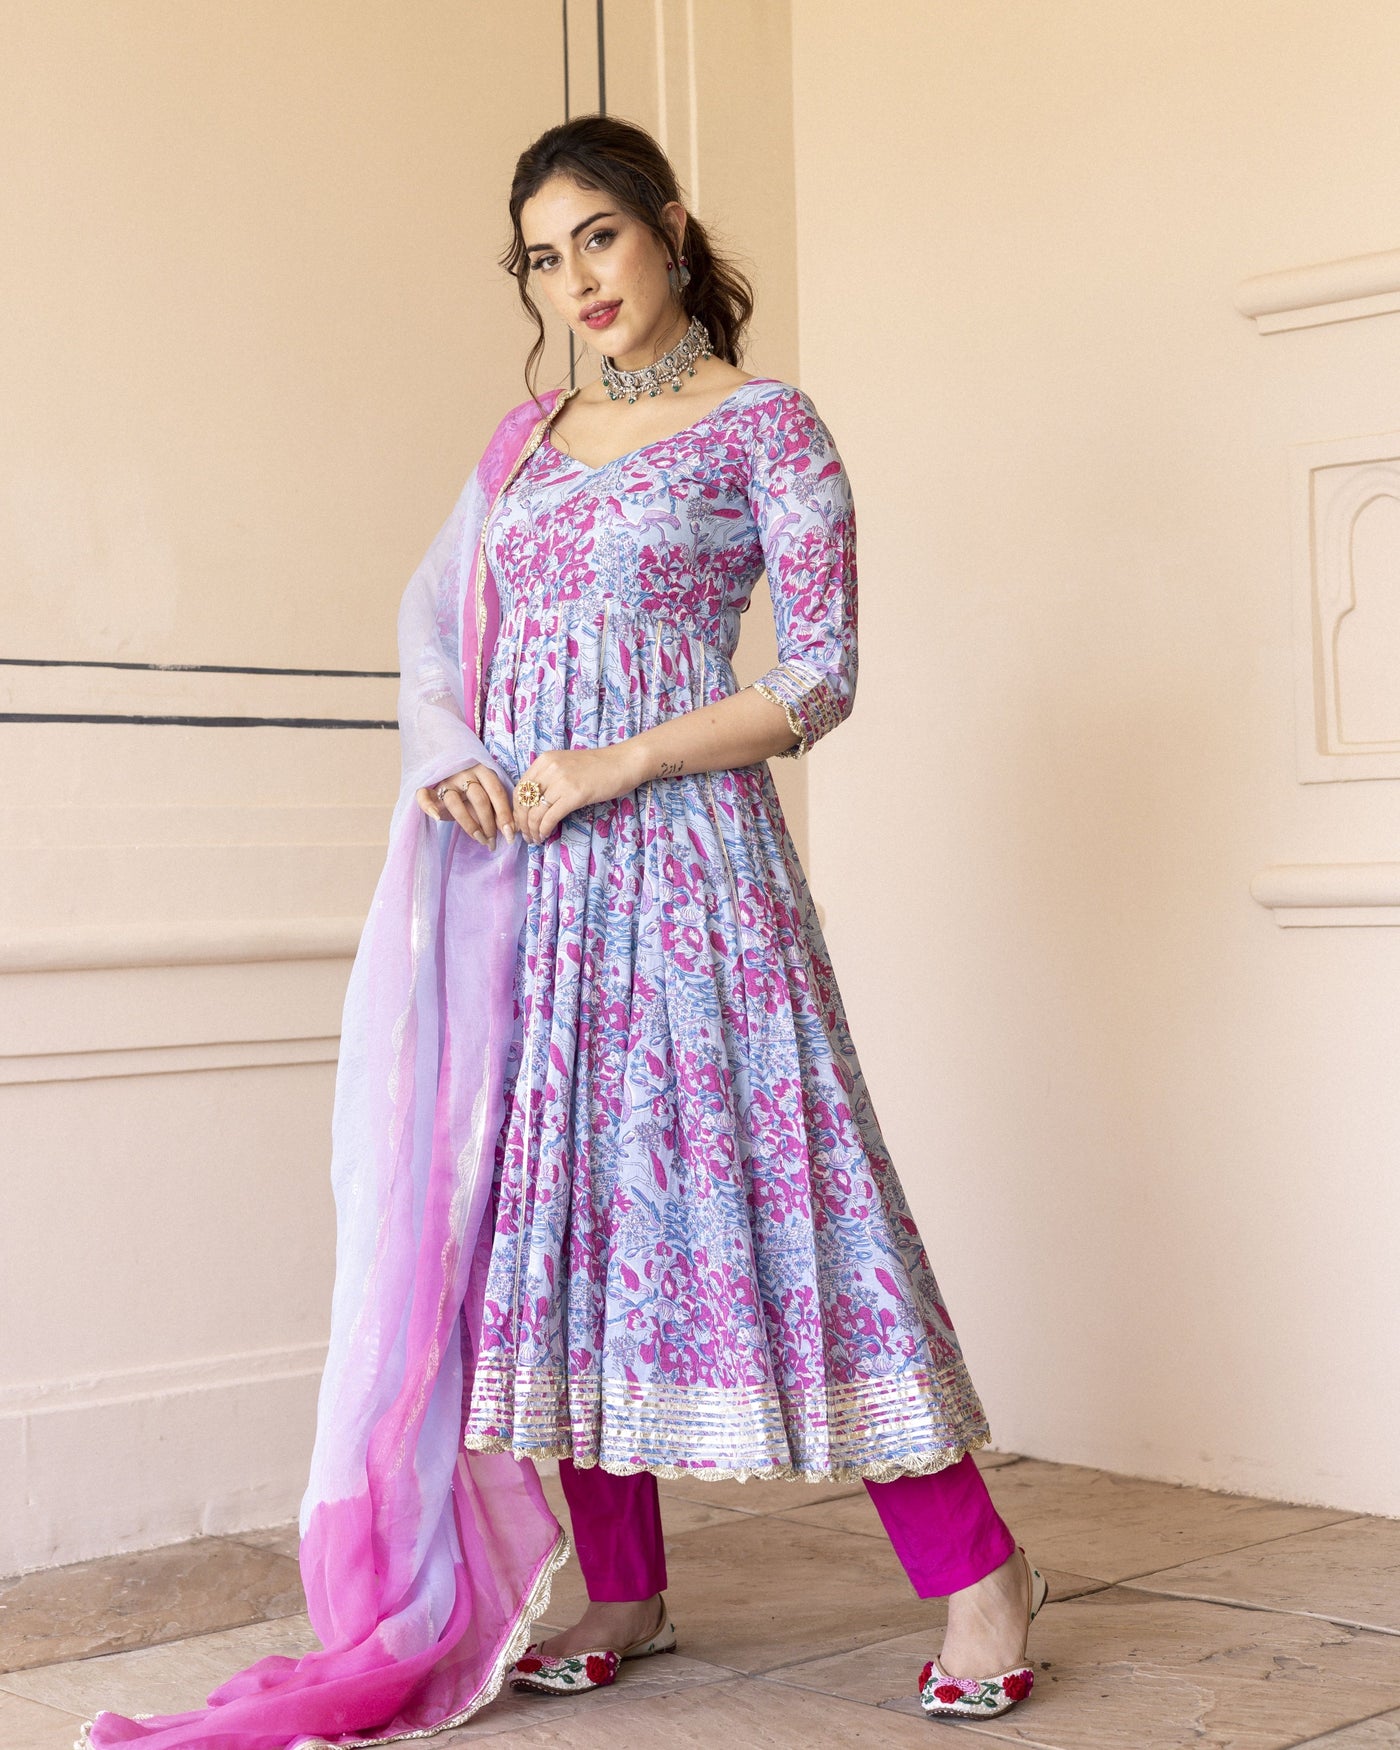 MSS STORE Cotton Blend Embroidered Salwar Suit Material Price in India -  Buy MSS STORE Cotton Blend Embroidered Salwar Suit Material online at  Flipkart.com